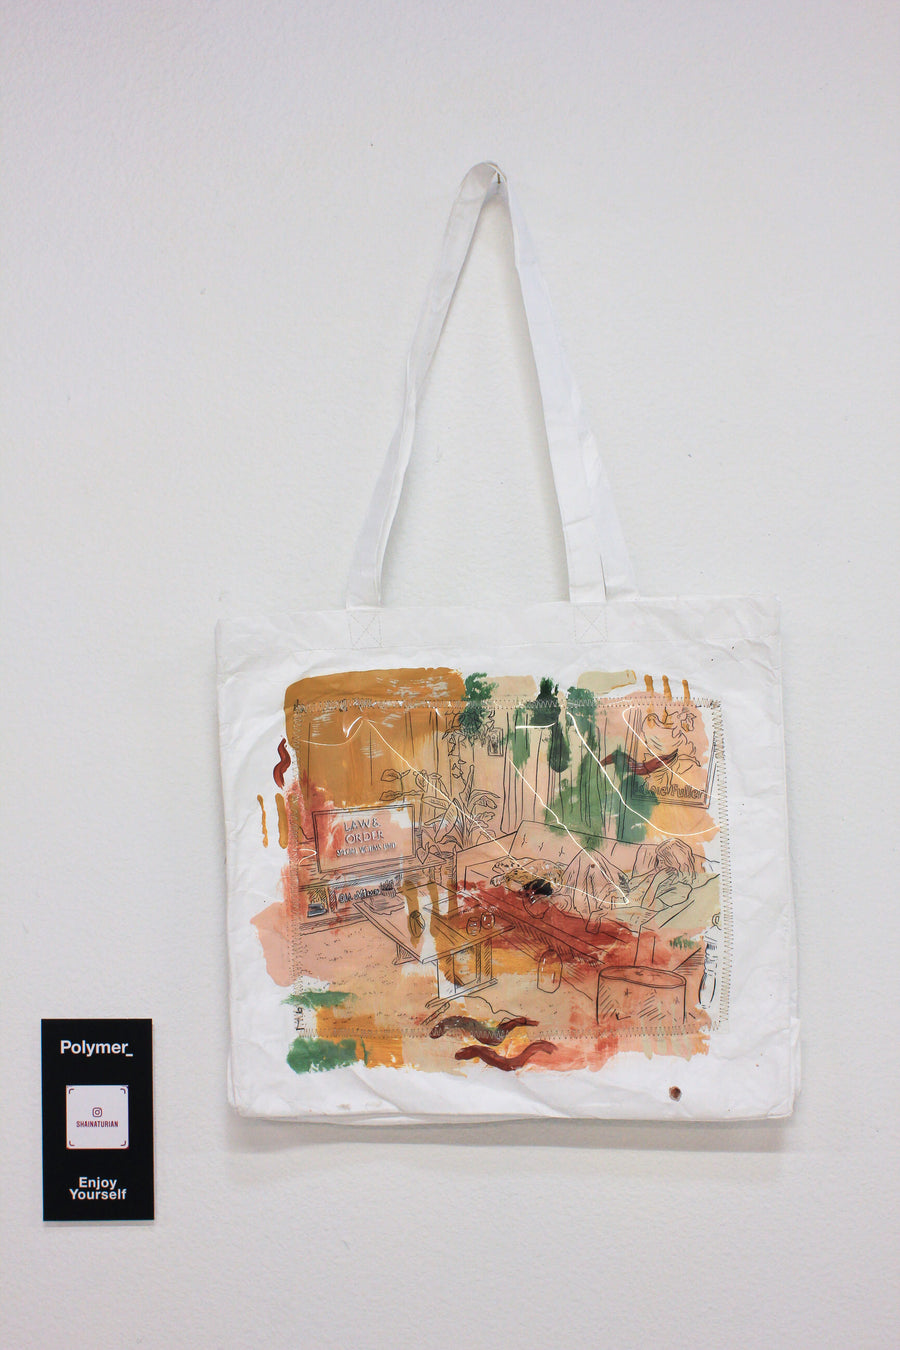 Polymer_ Enjoy Yourself Art Tote by Shaina Turain